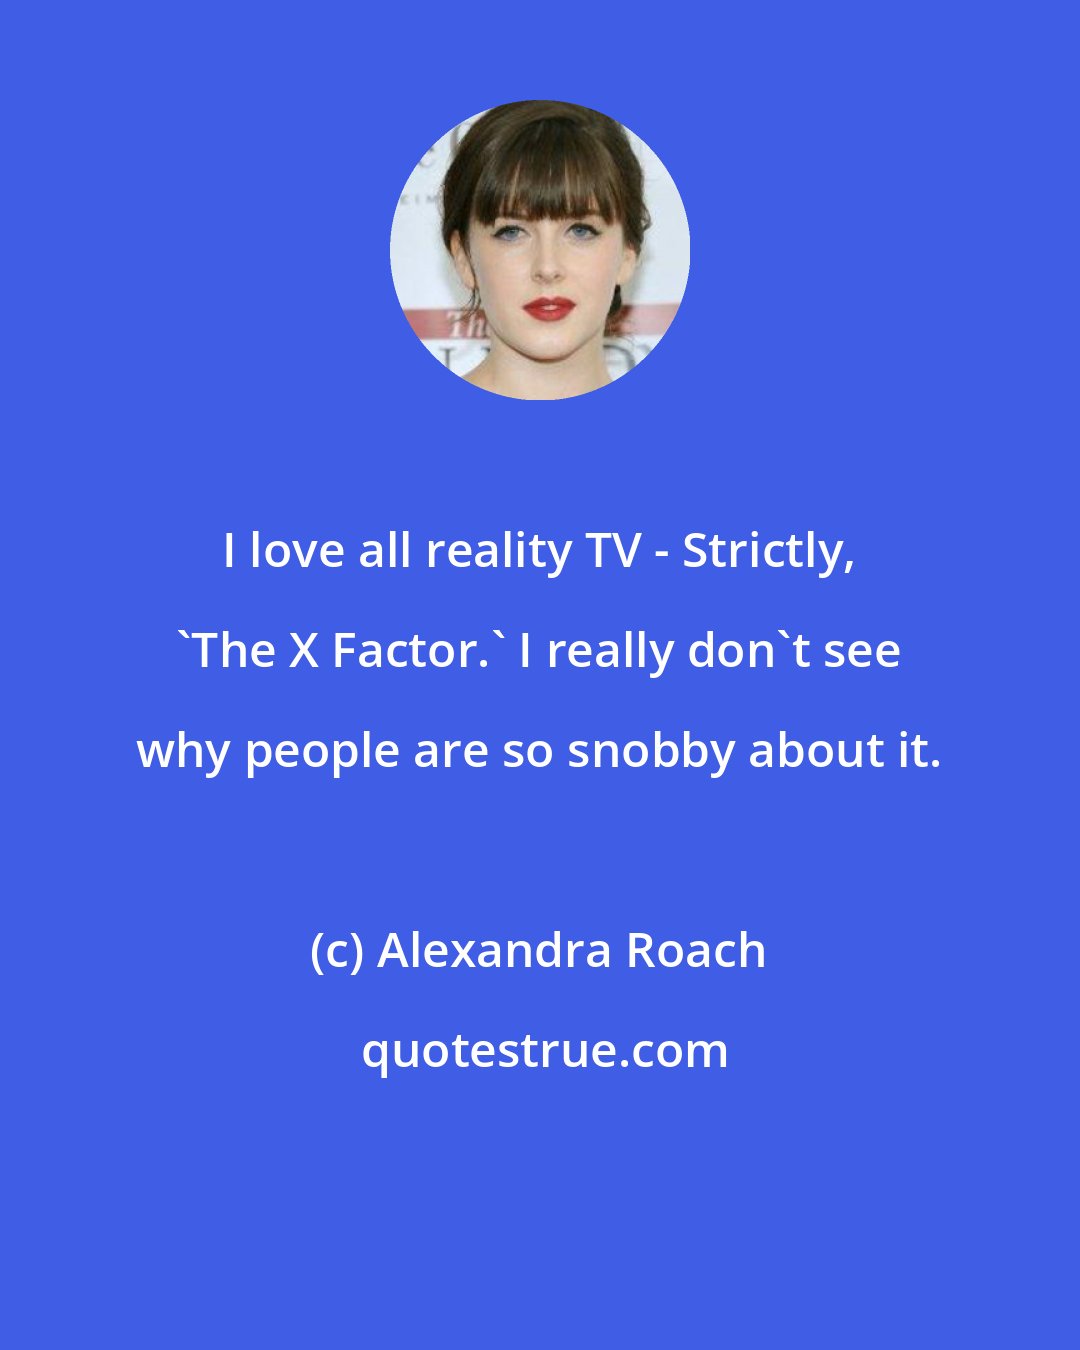 Alexandra Roach: I love all reality TV - Strictly, 'The X Factor.' I really don't see why people are so snobby about it.